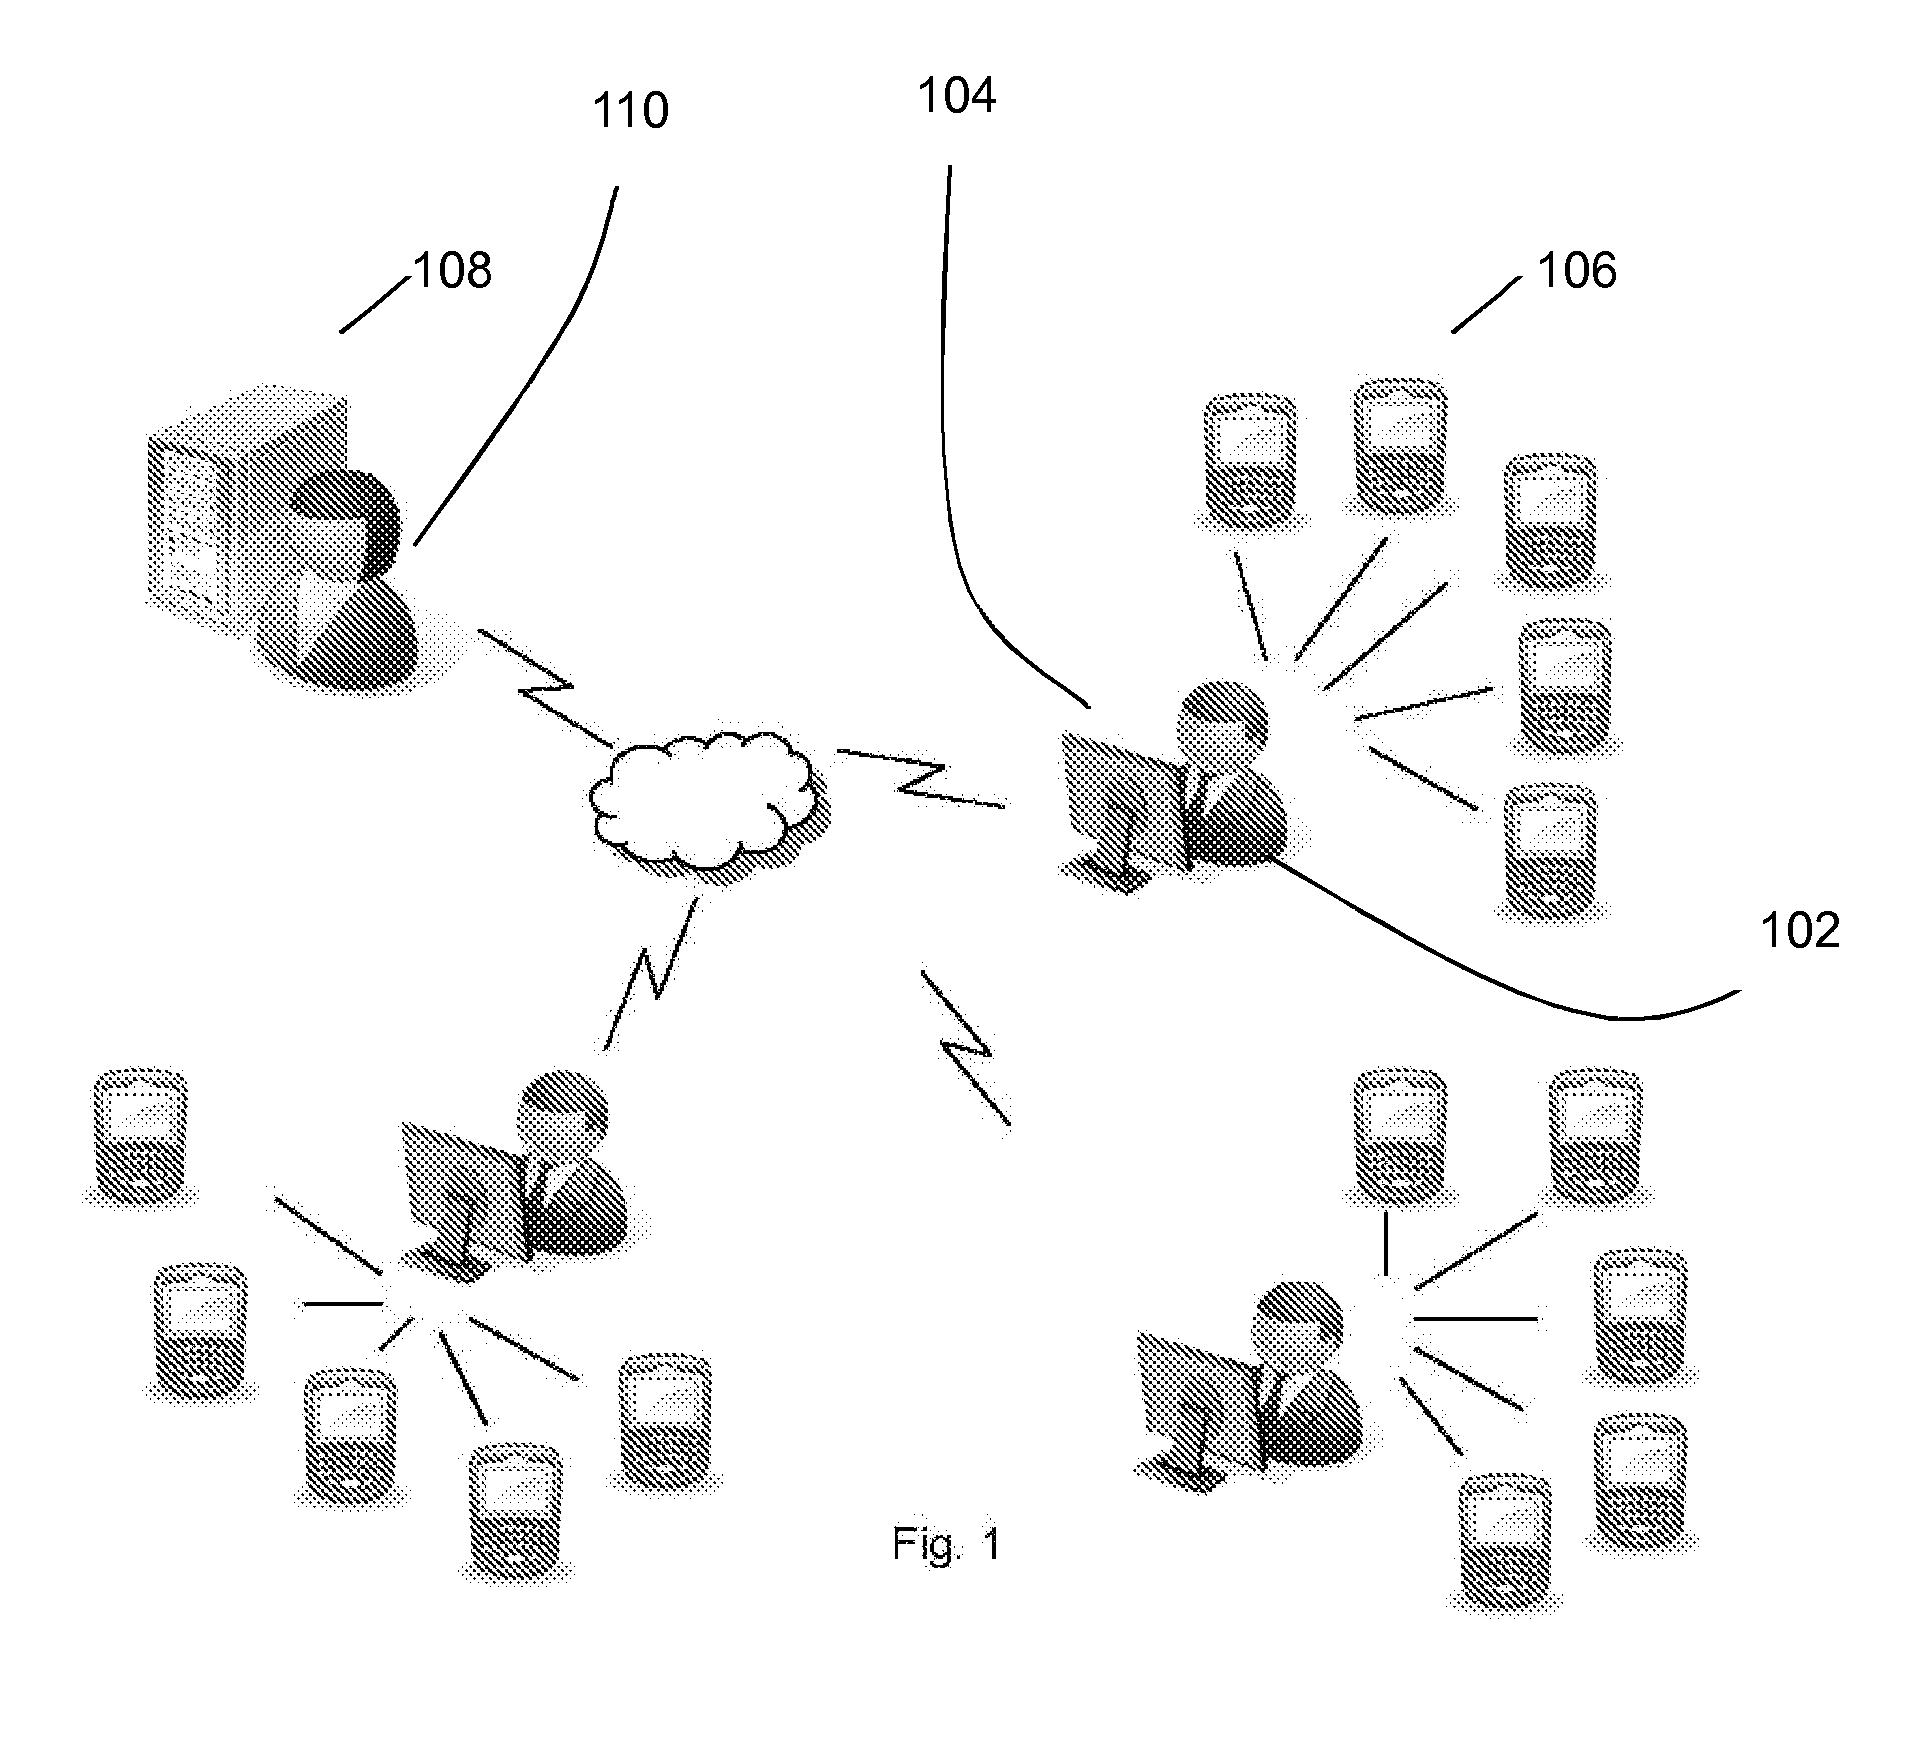 System and method for managing and administering a high stakes test